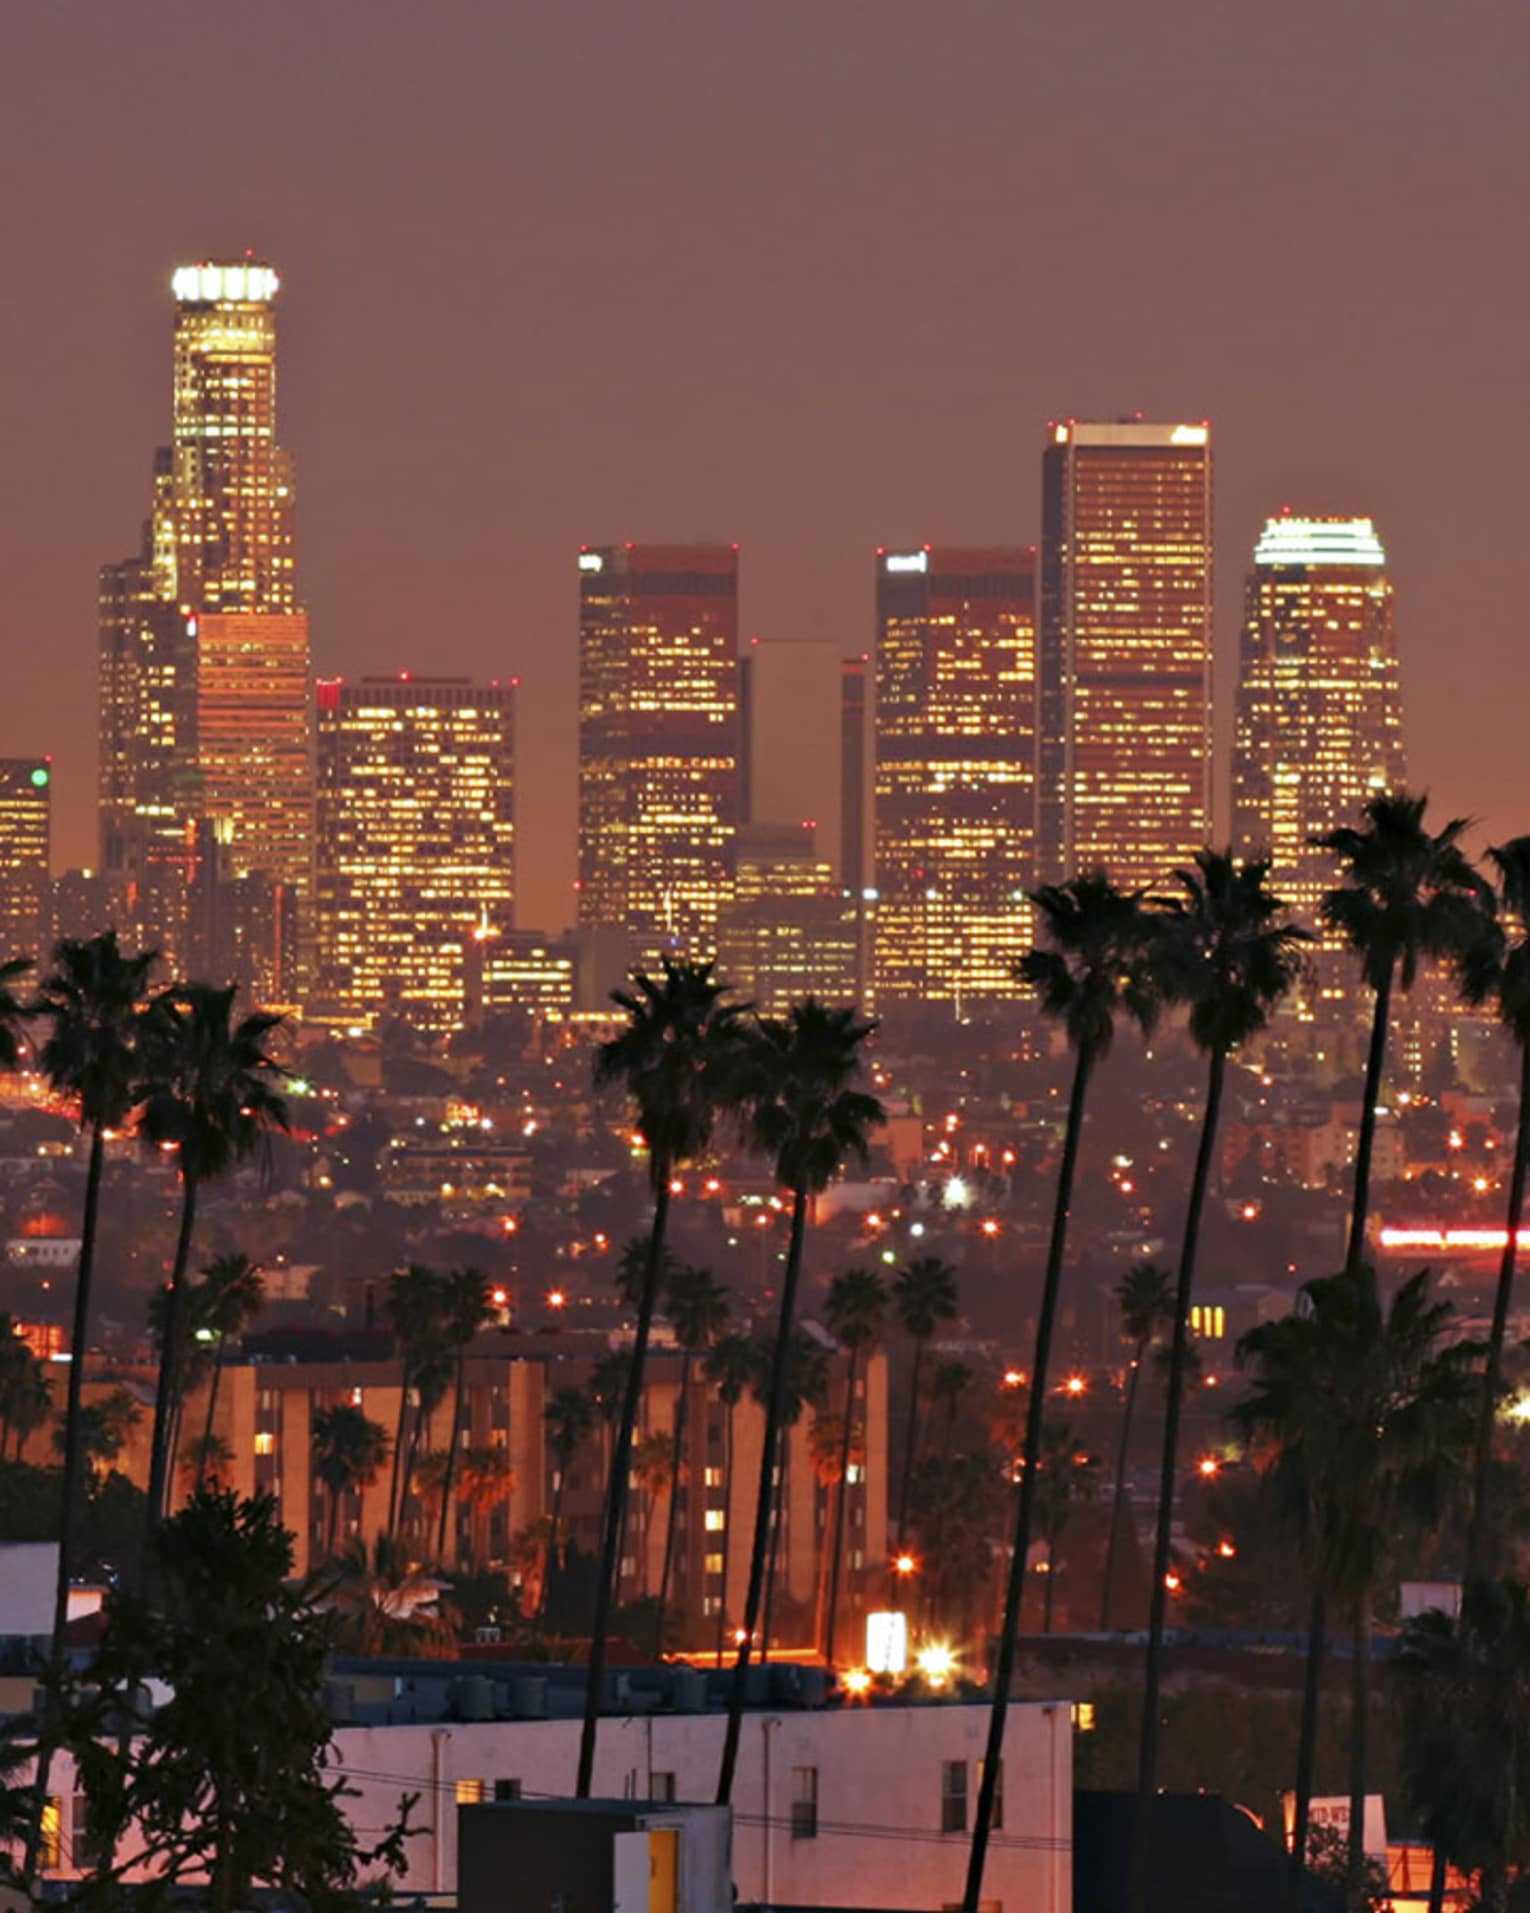 Los Angeles skyline buildings with lights, palm tree silhouettes at night